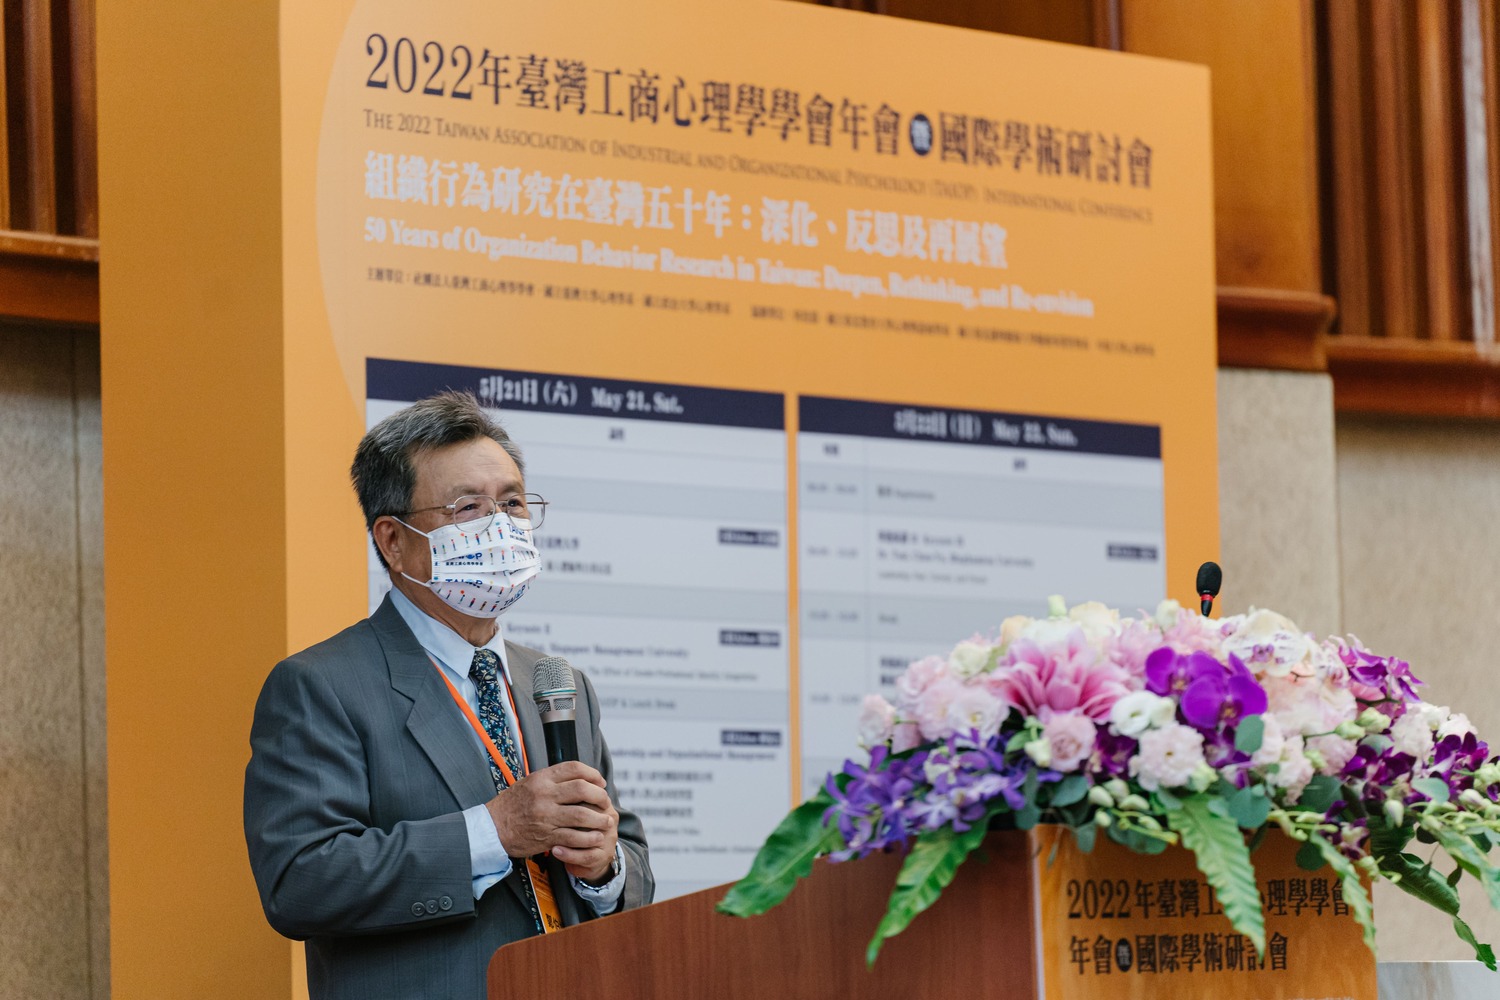 2022TAIOPconference_02-1